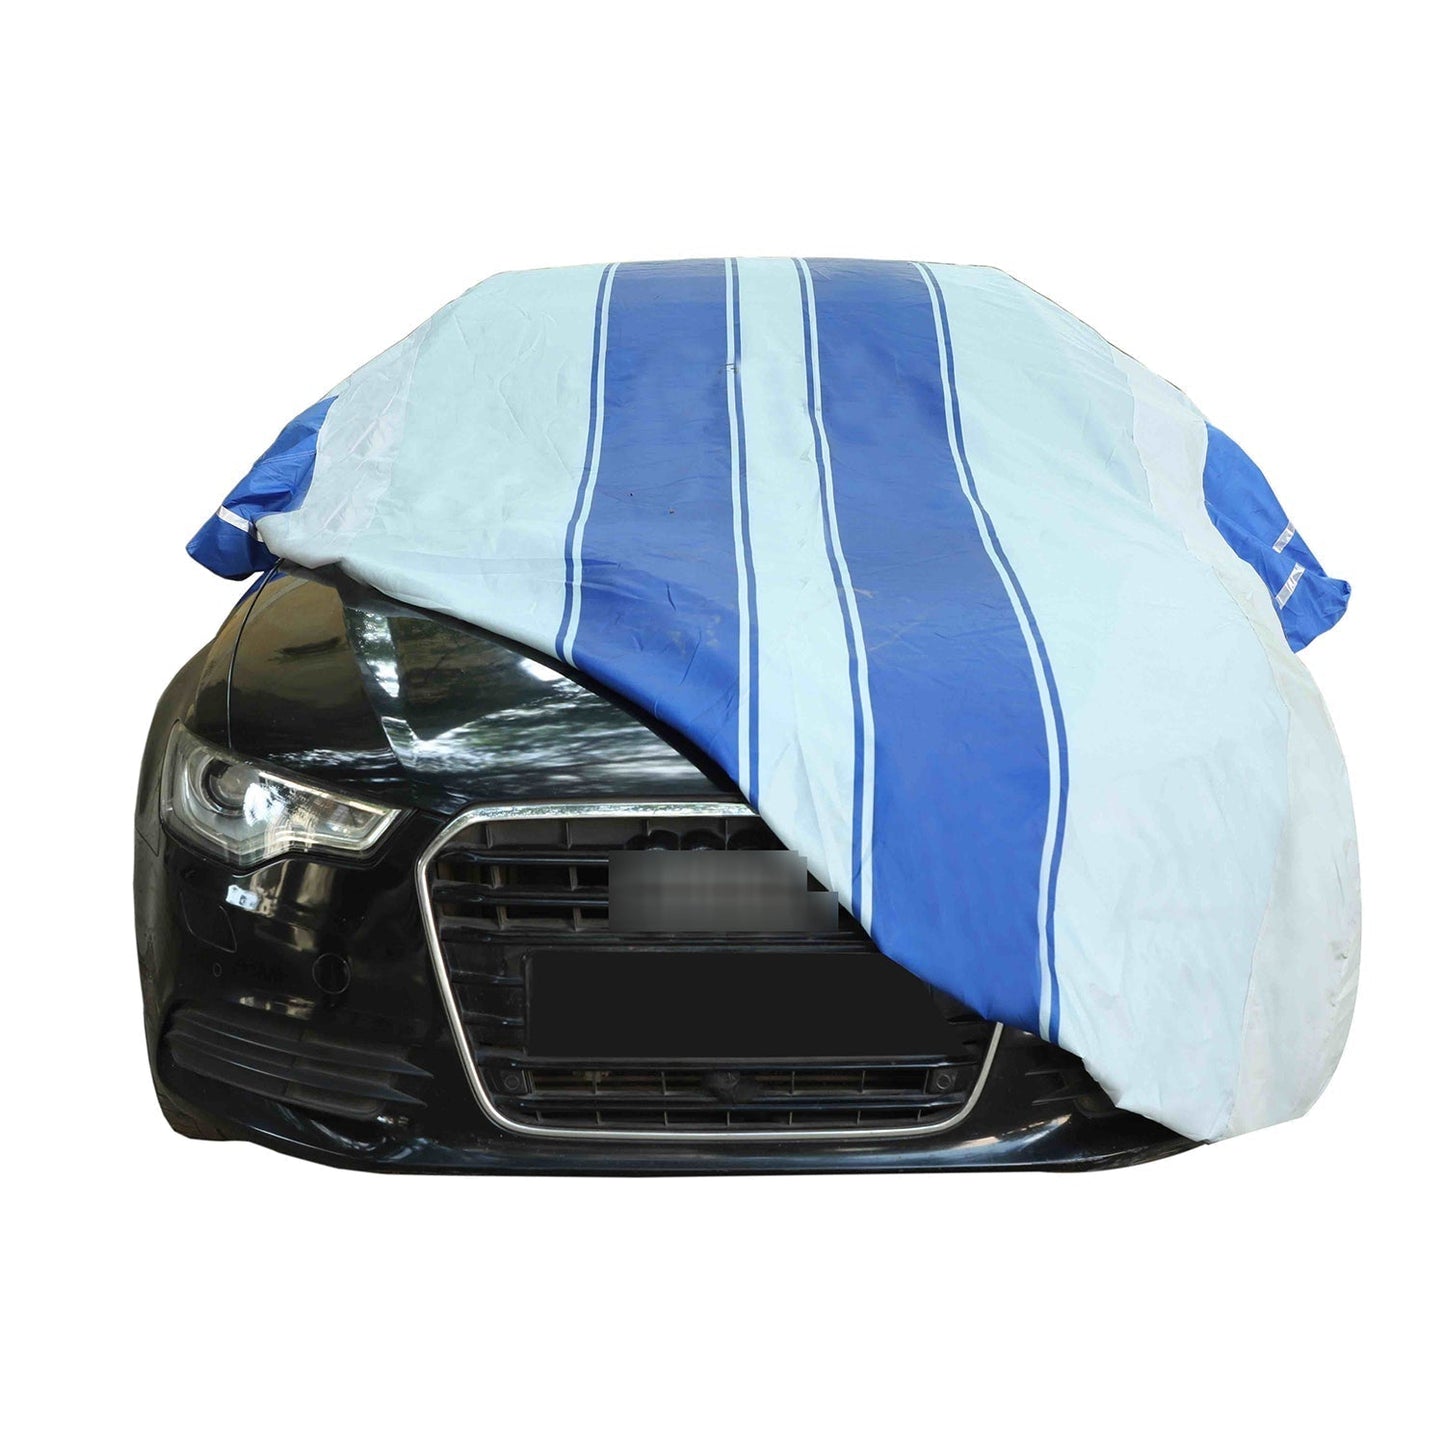 Oshotto 100% Blue dustproof and Water Resistant Car Body Cover with Mirror Pockets For Mahindra Kuv-100